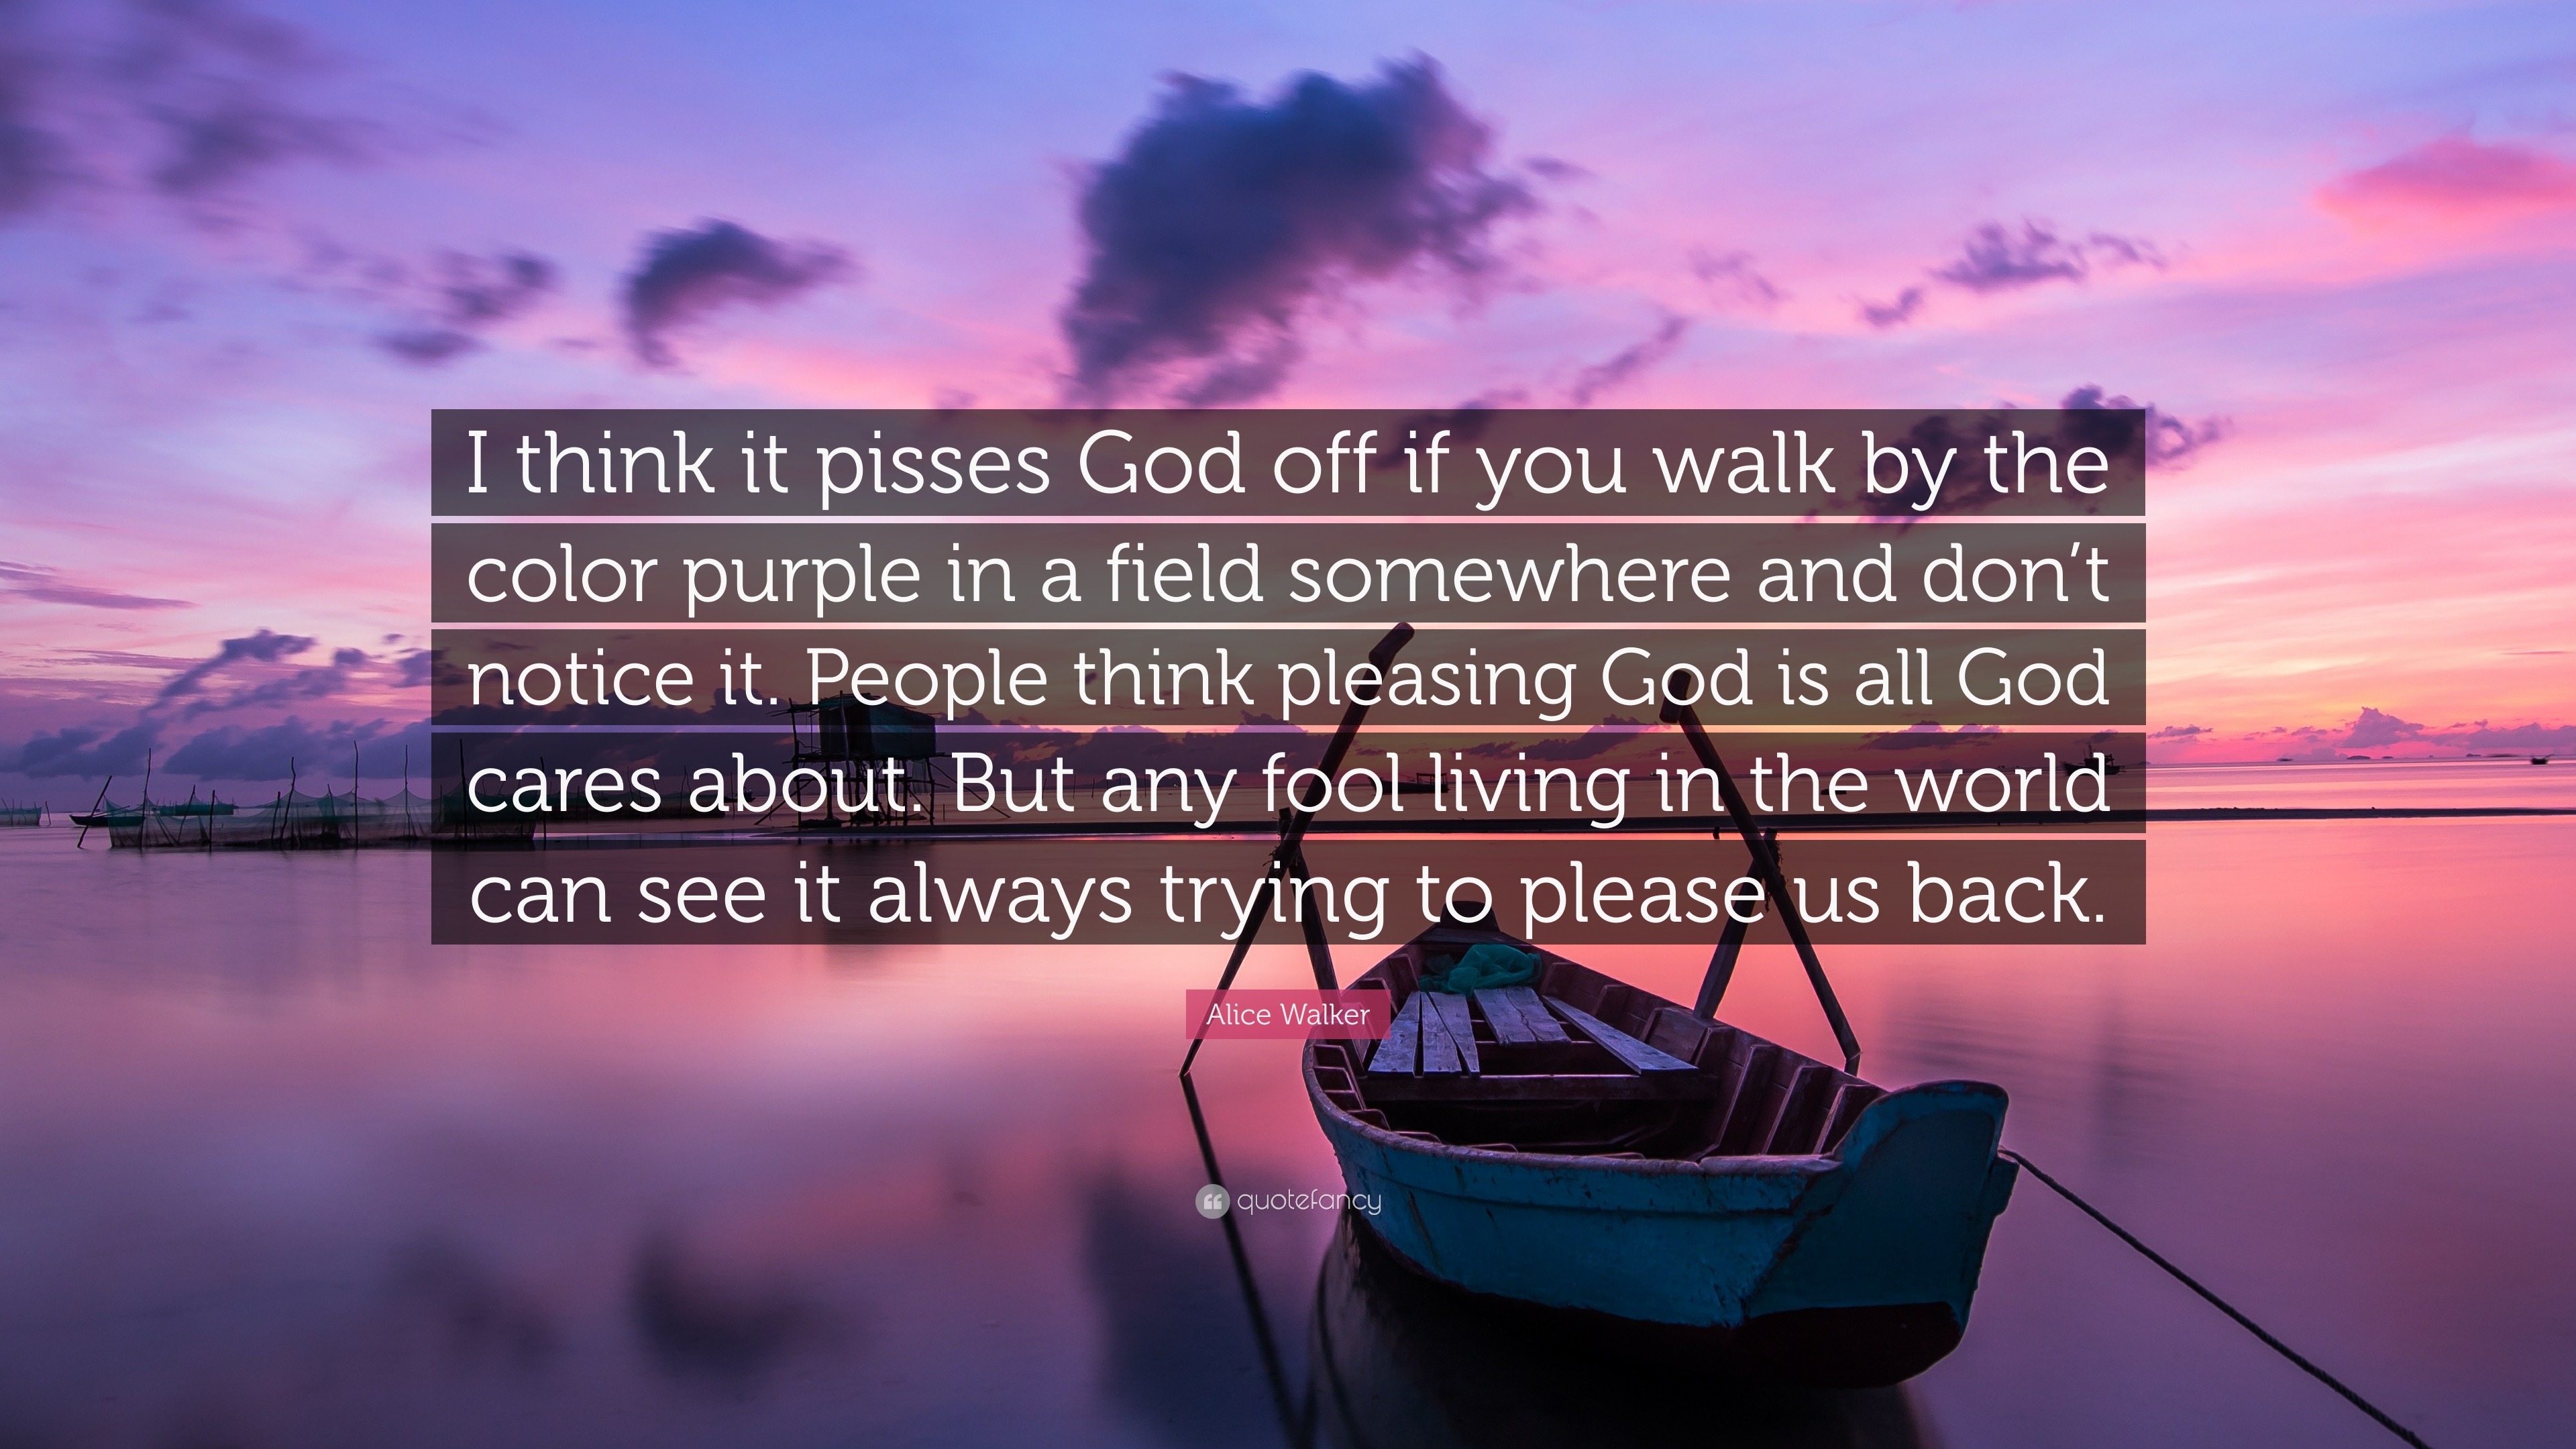 Alice Walker Quote “I think it pisses God off if you walk by the